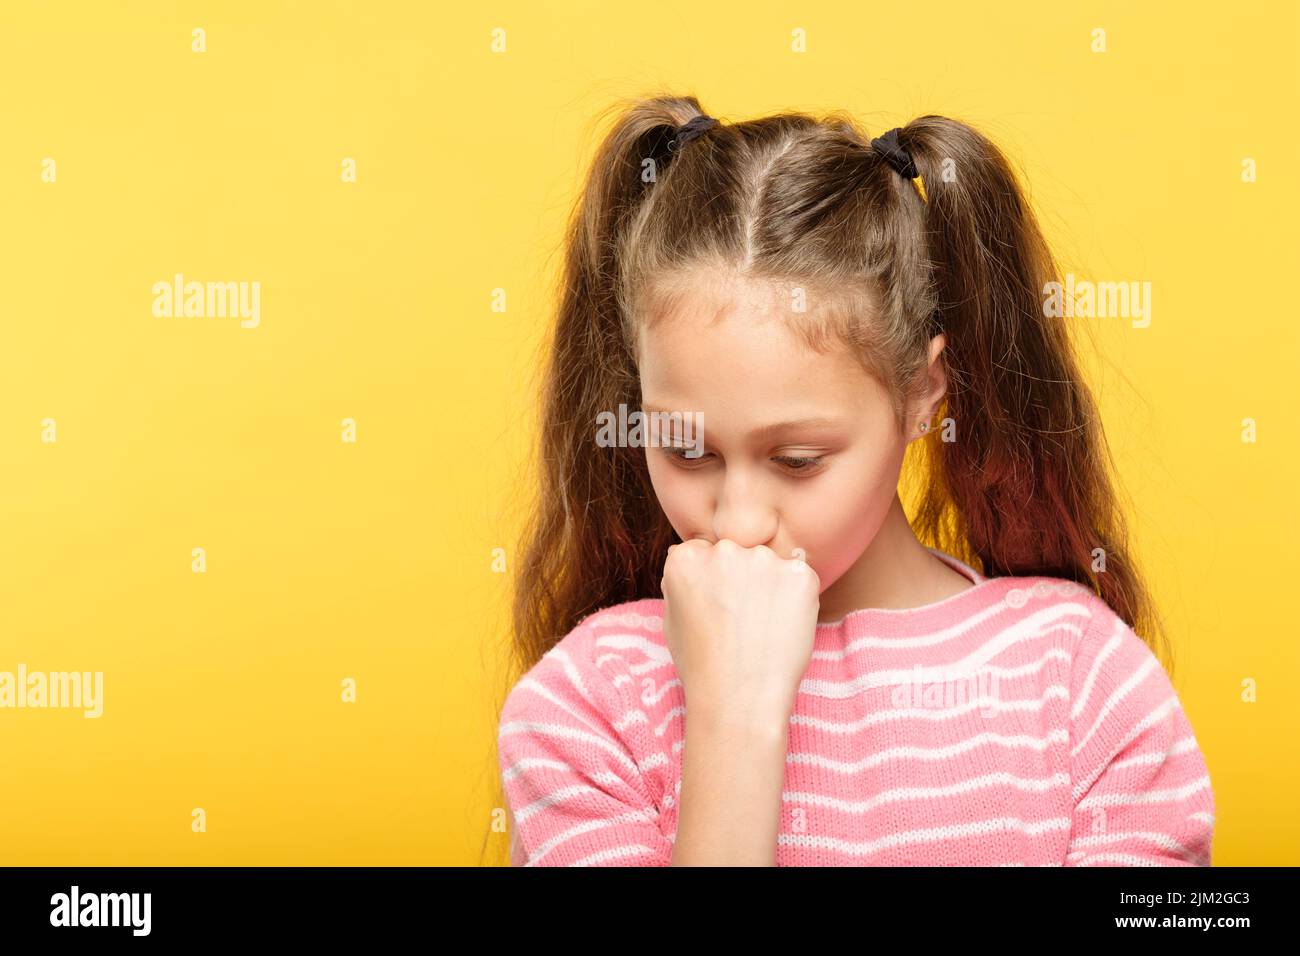 sad pensive thoughtful girl looking down emotion Stock Photo